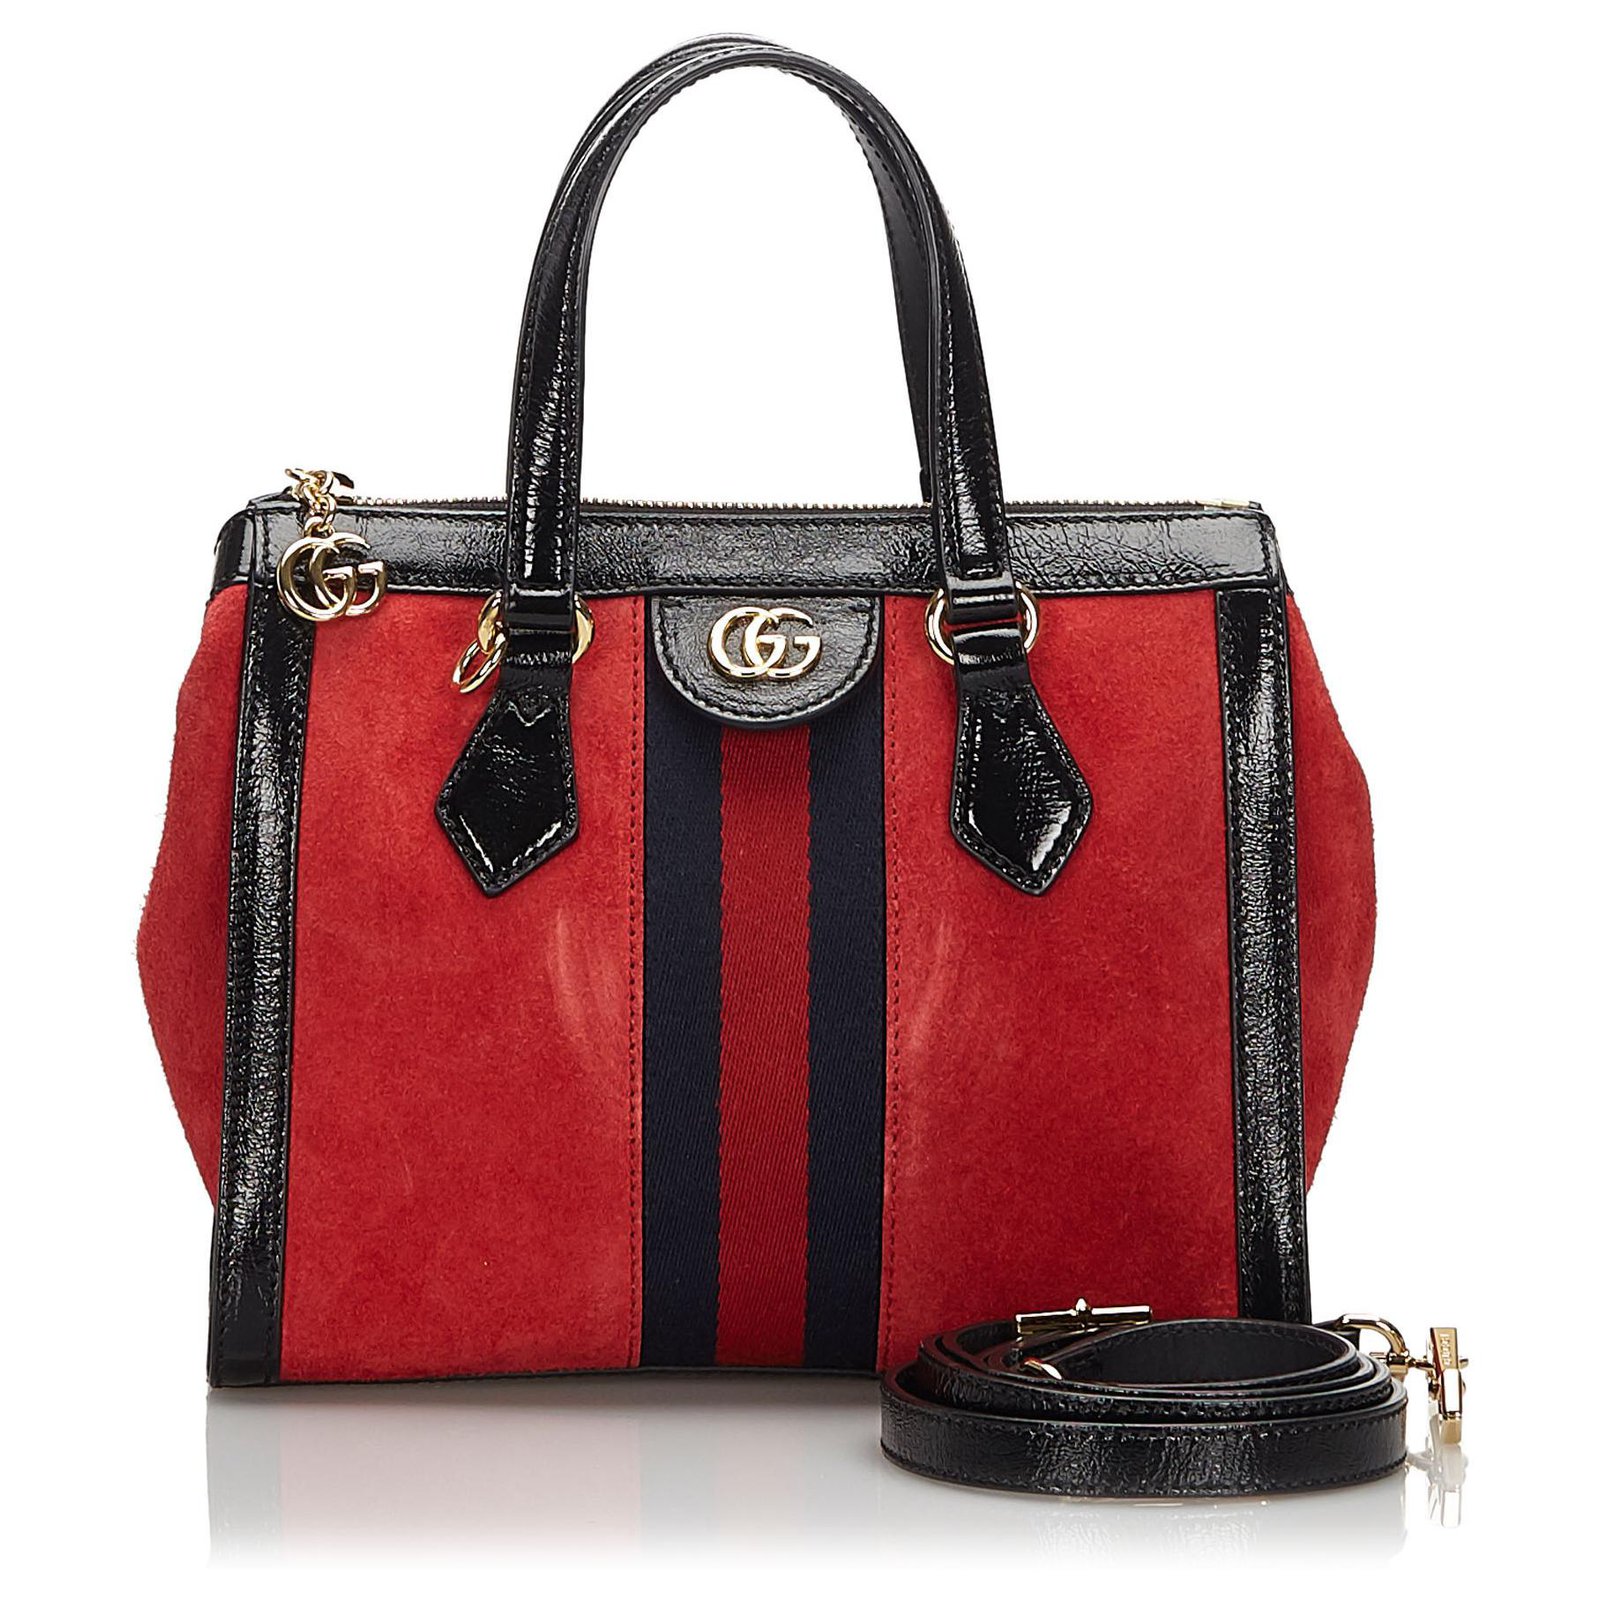 Gucci Ophidia Shoulder Bag Small red suede and black leather